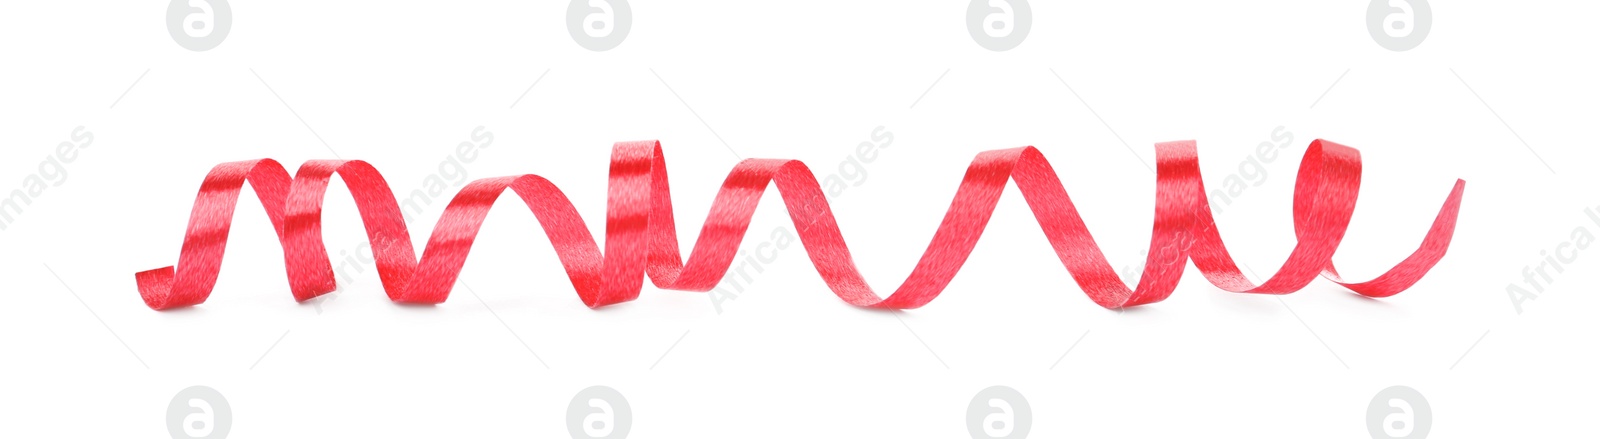 Photo of Shiny pink serpentine streamer isolated on white